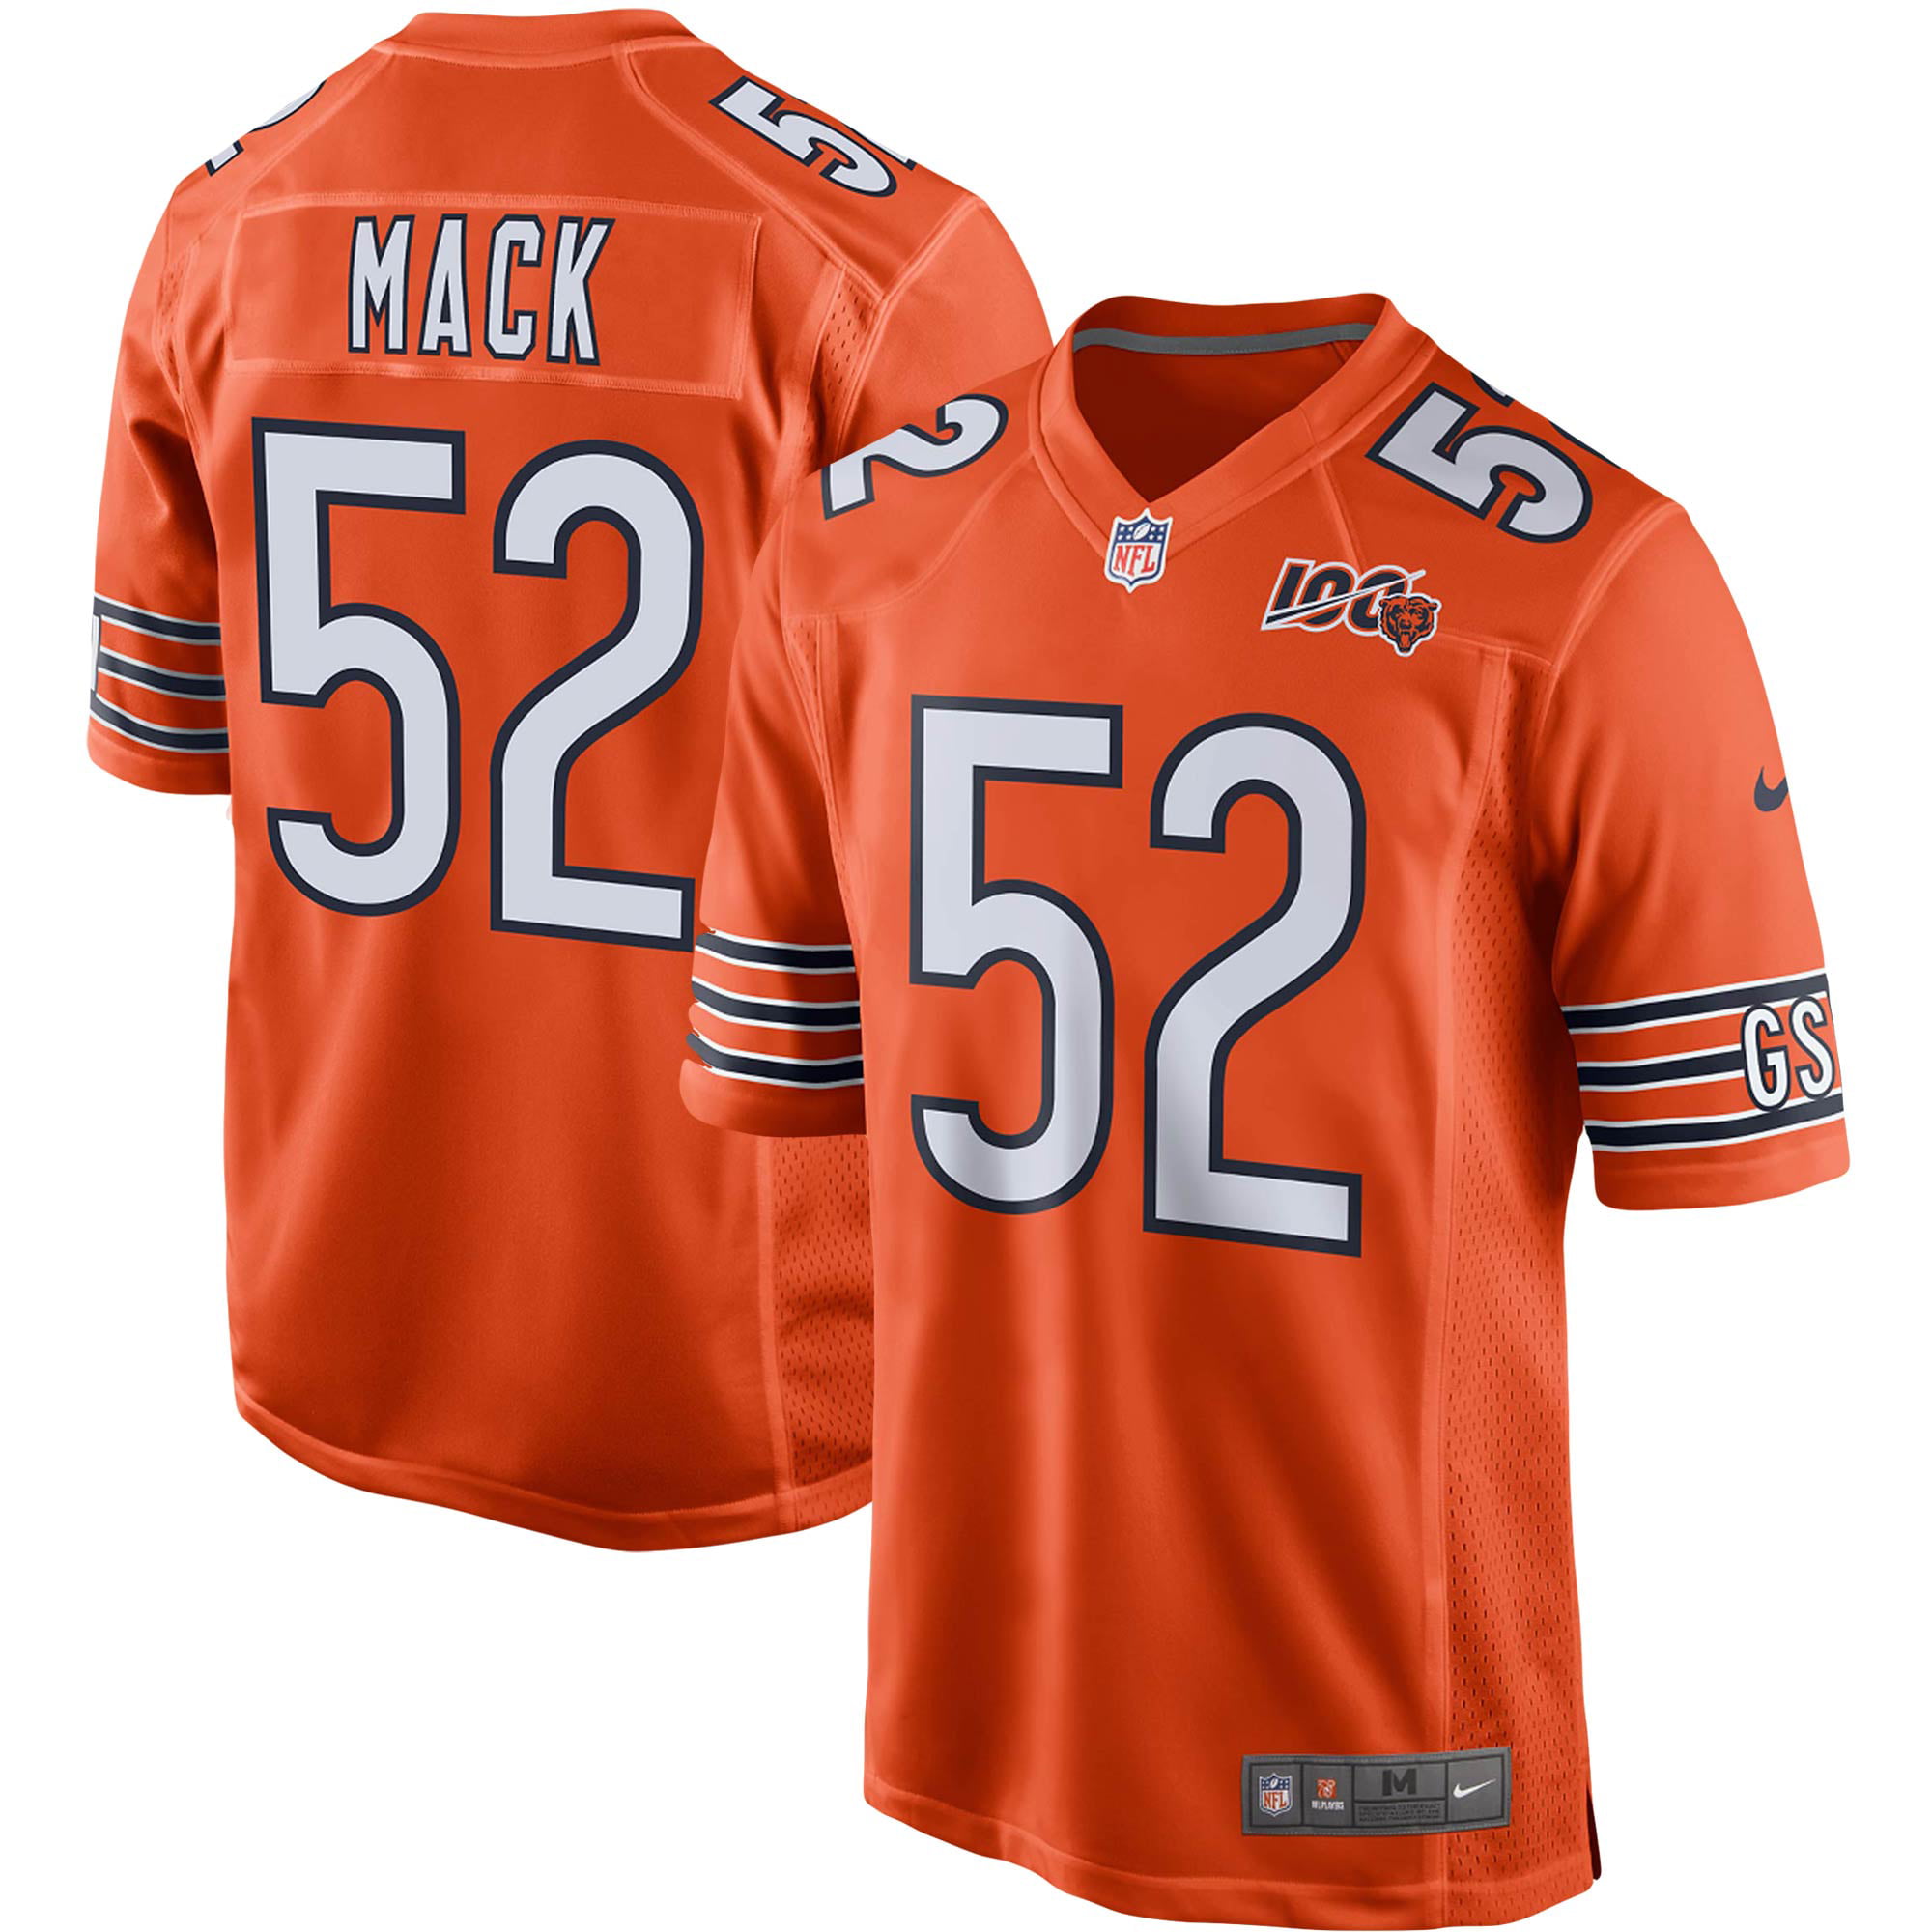 chicago bears 5t jersey